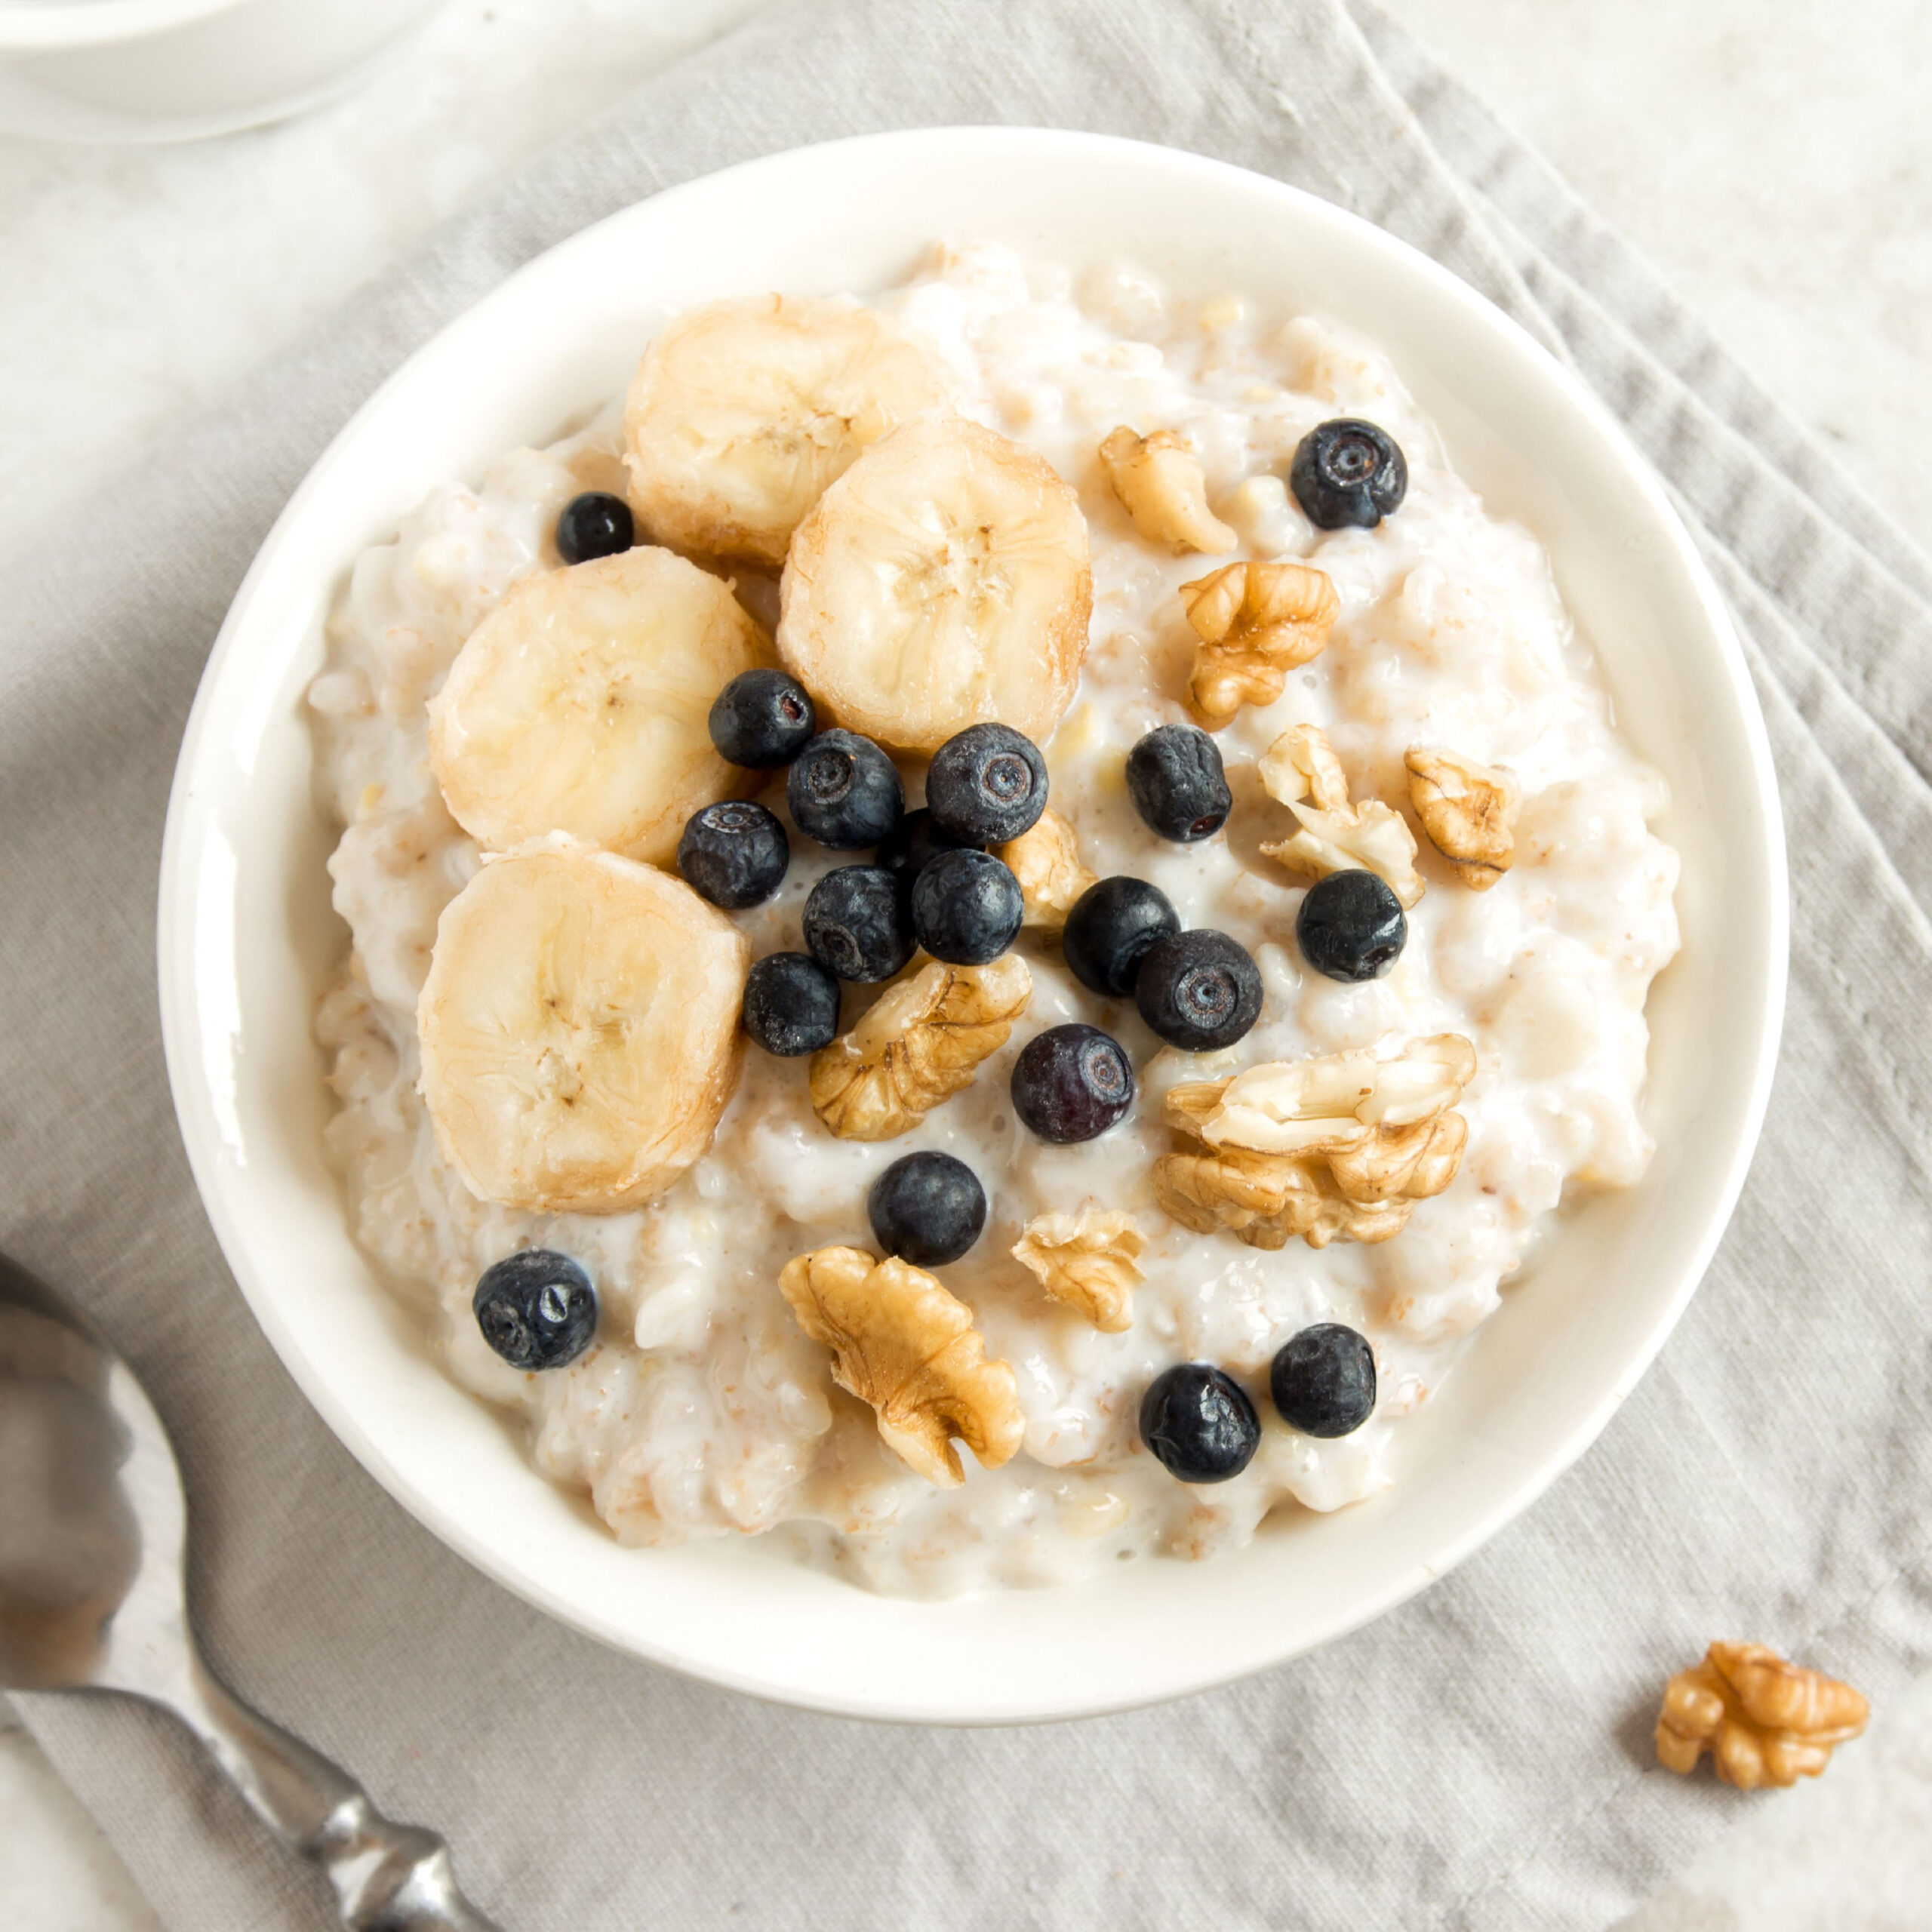 oatmeal topped with blueberries, banana, and walnuts